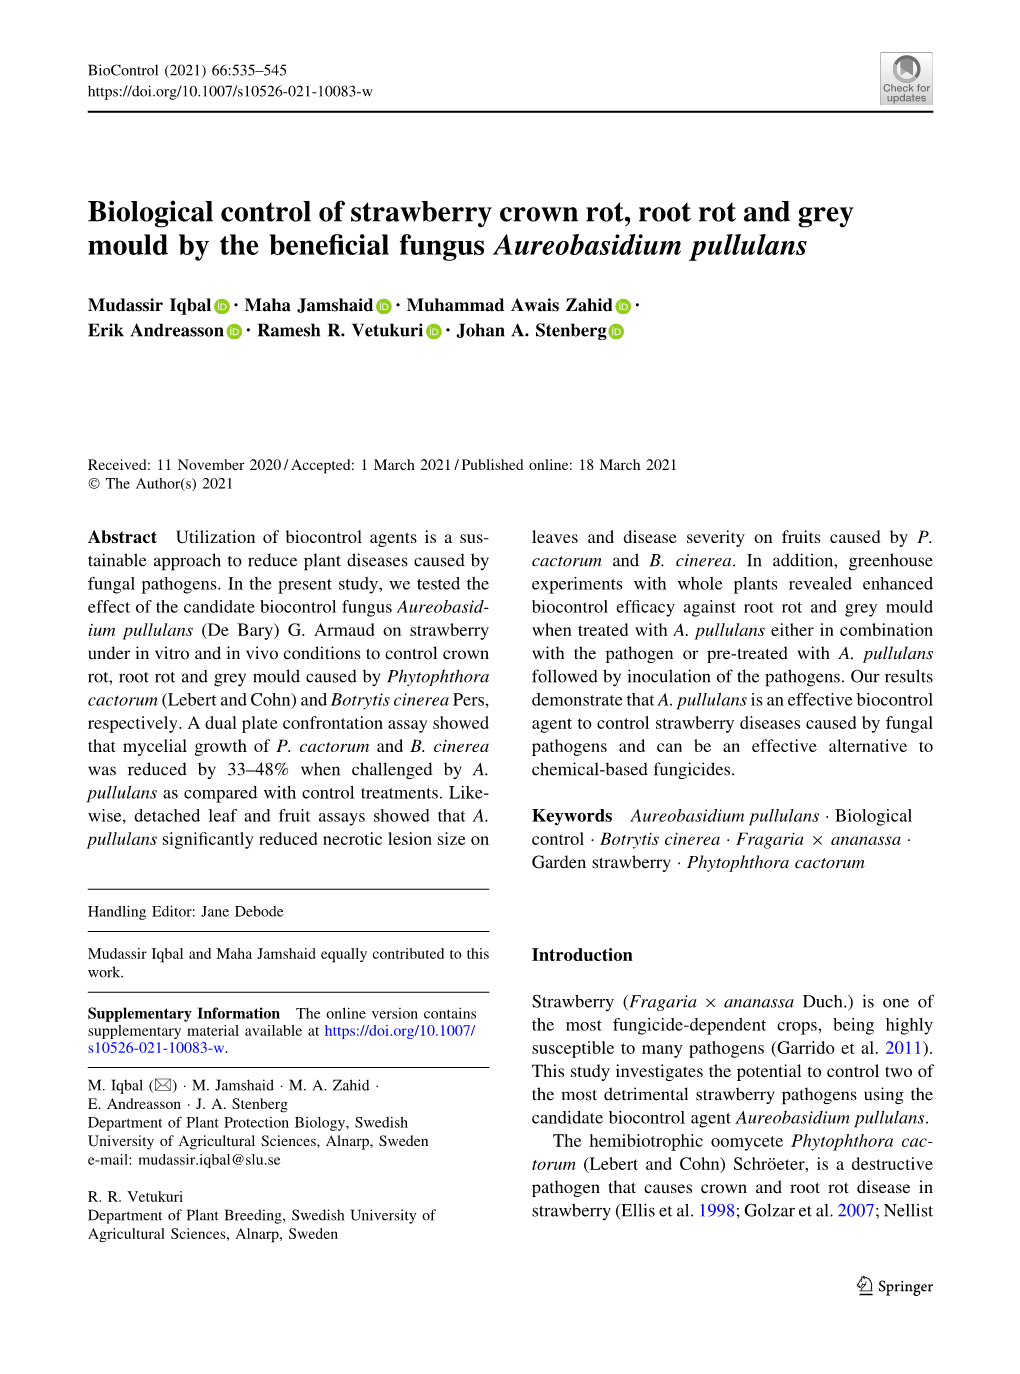 Biological Control of Strawberry Crown Rot, Root Rot and Grey Mould by the Beneficial Fungus Aureobasidium Pullulans